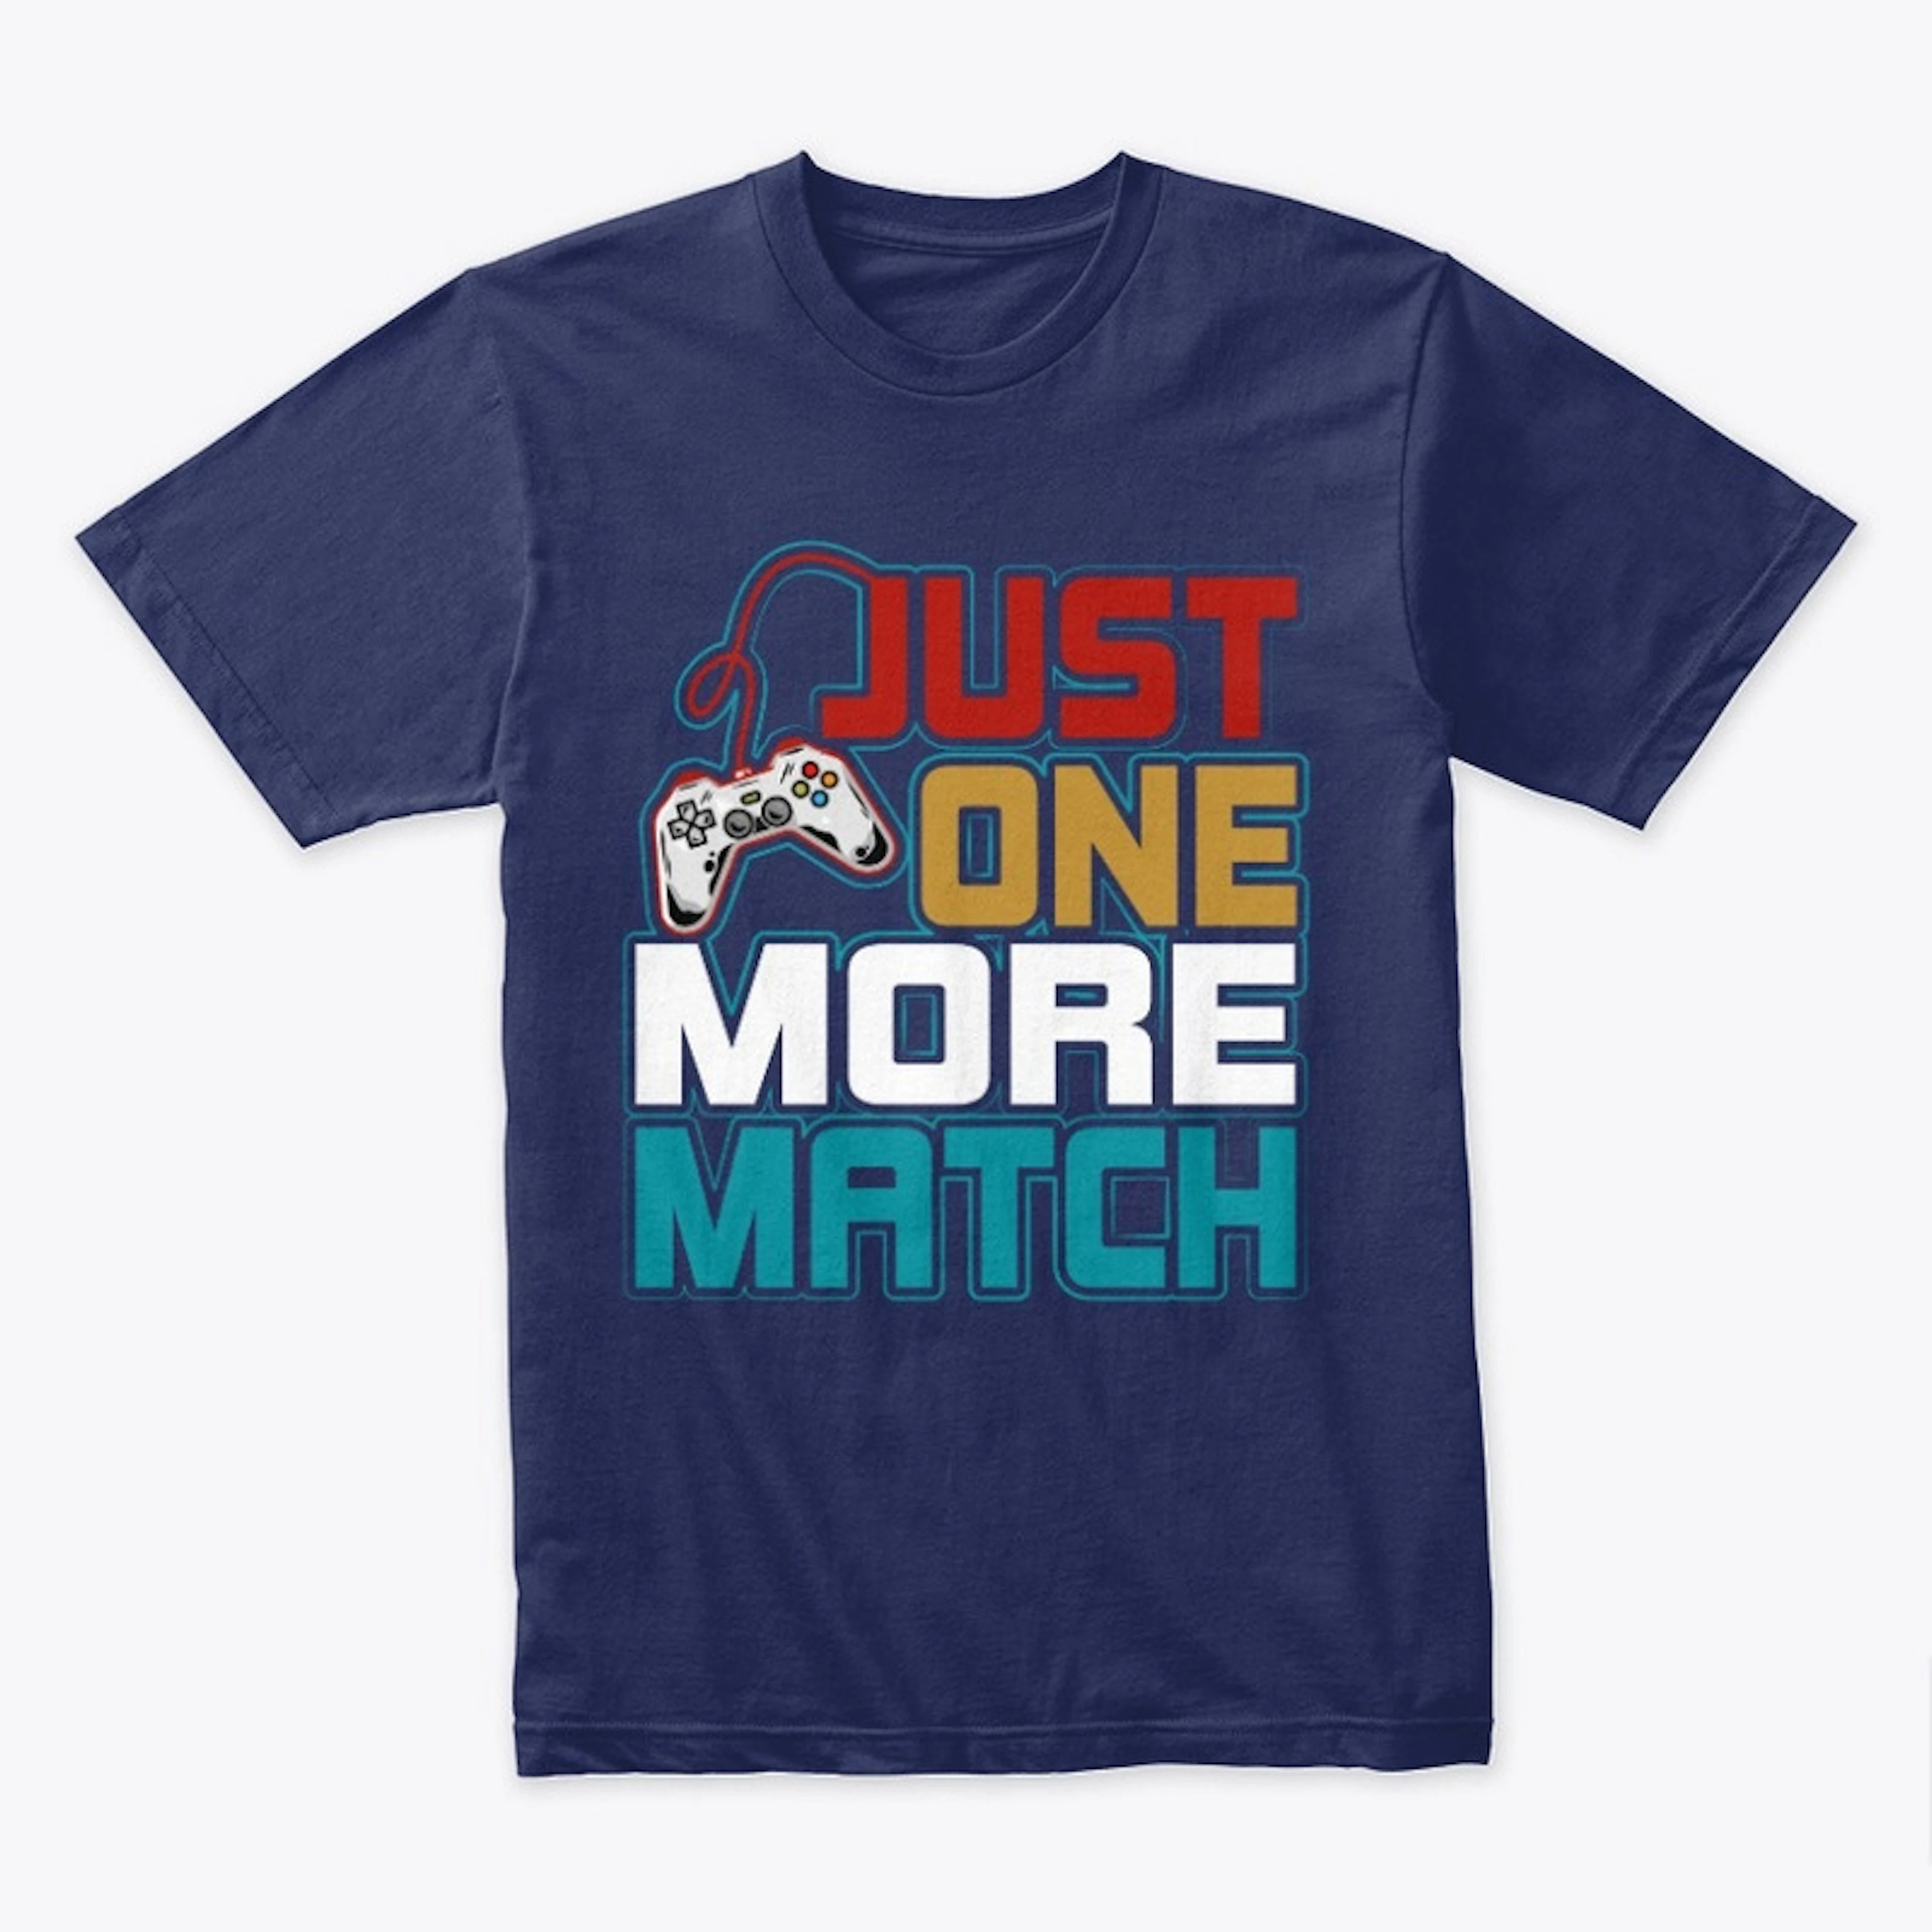 Just one more match